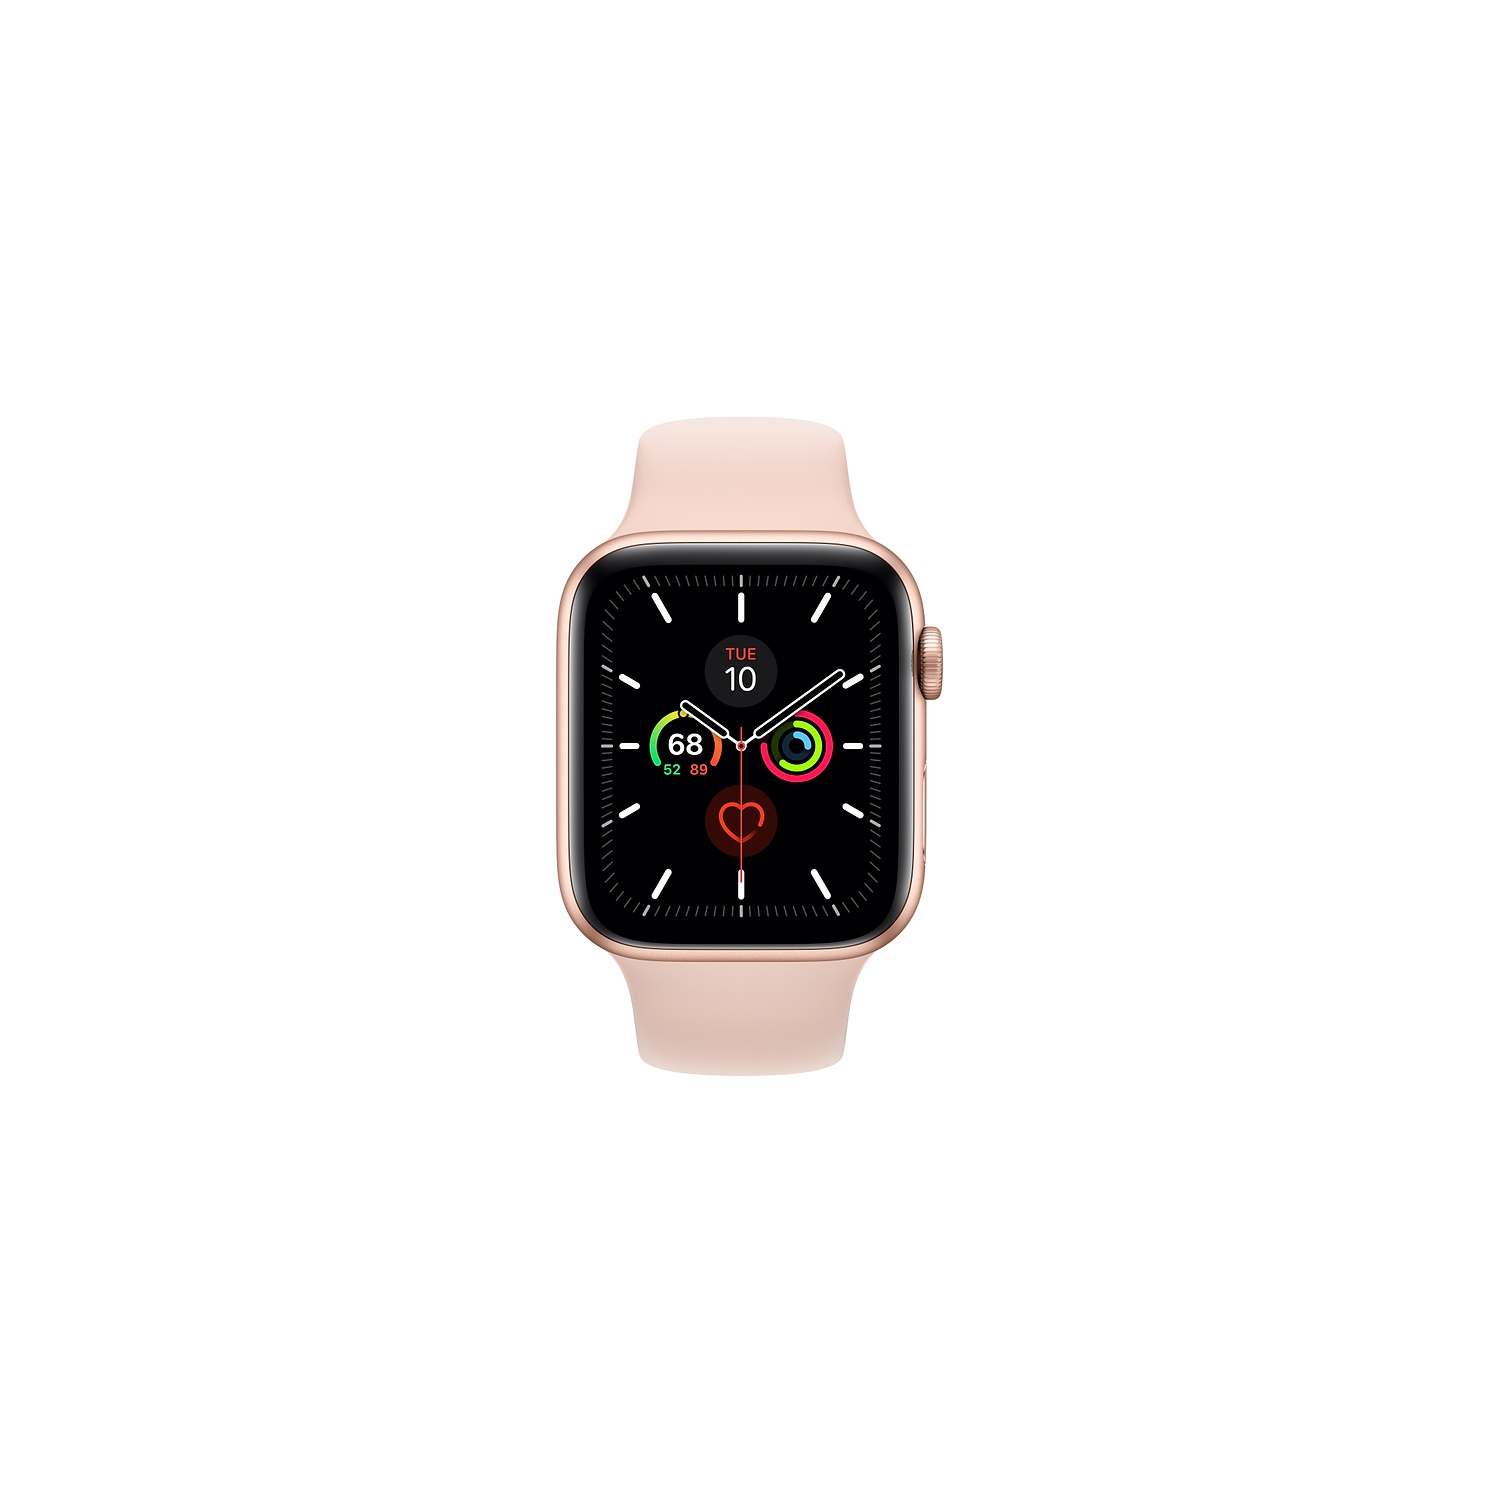 Refurbished (Excellent) - Apple Watch Series 5 (GPS + Cellular) 44mm Gold Aluminum with Pink Sand Sport Band - Certified Refurbished